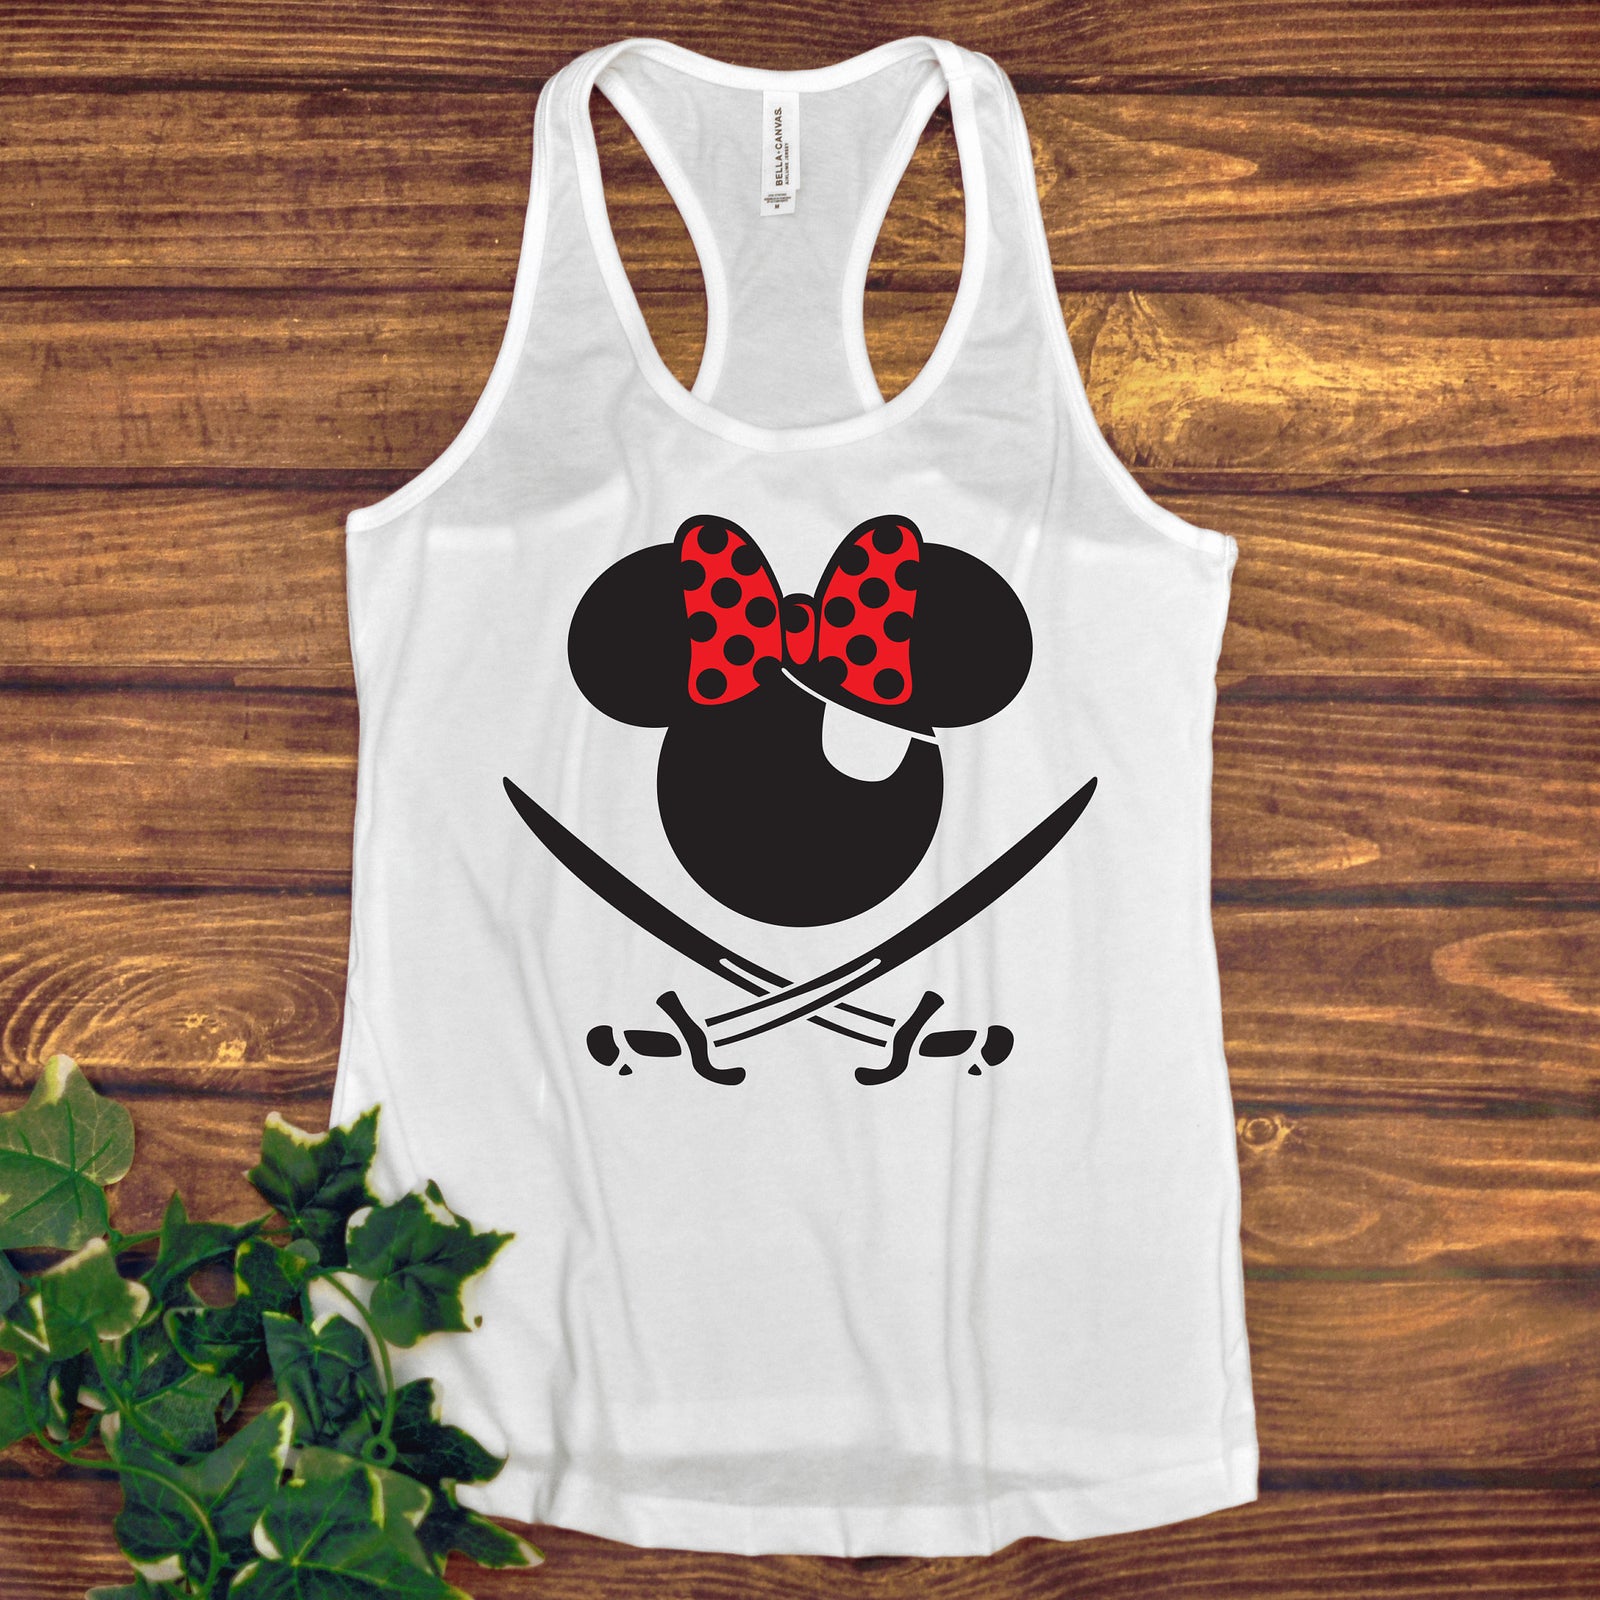 Pirate Minnie Mouse Adult Racer back Tank Top- Drinks - Disney Cruise - Caribbean